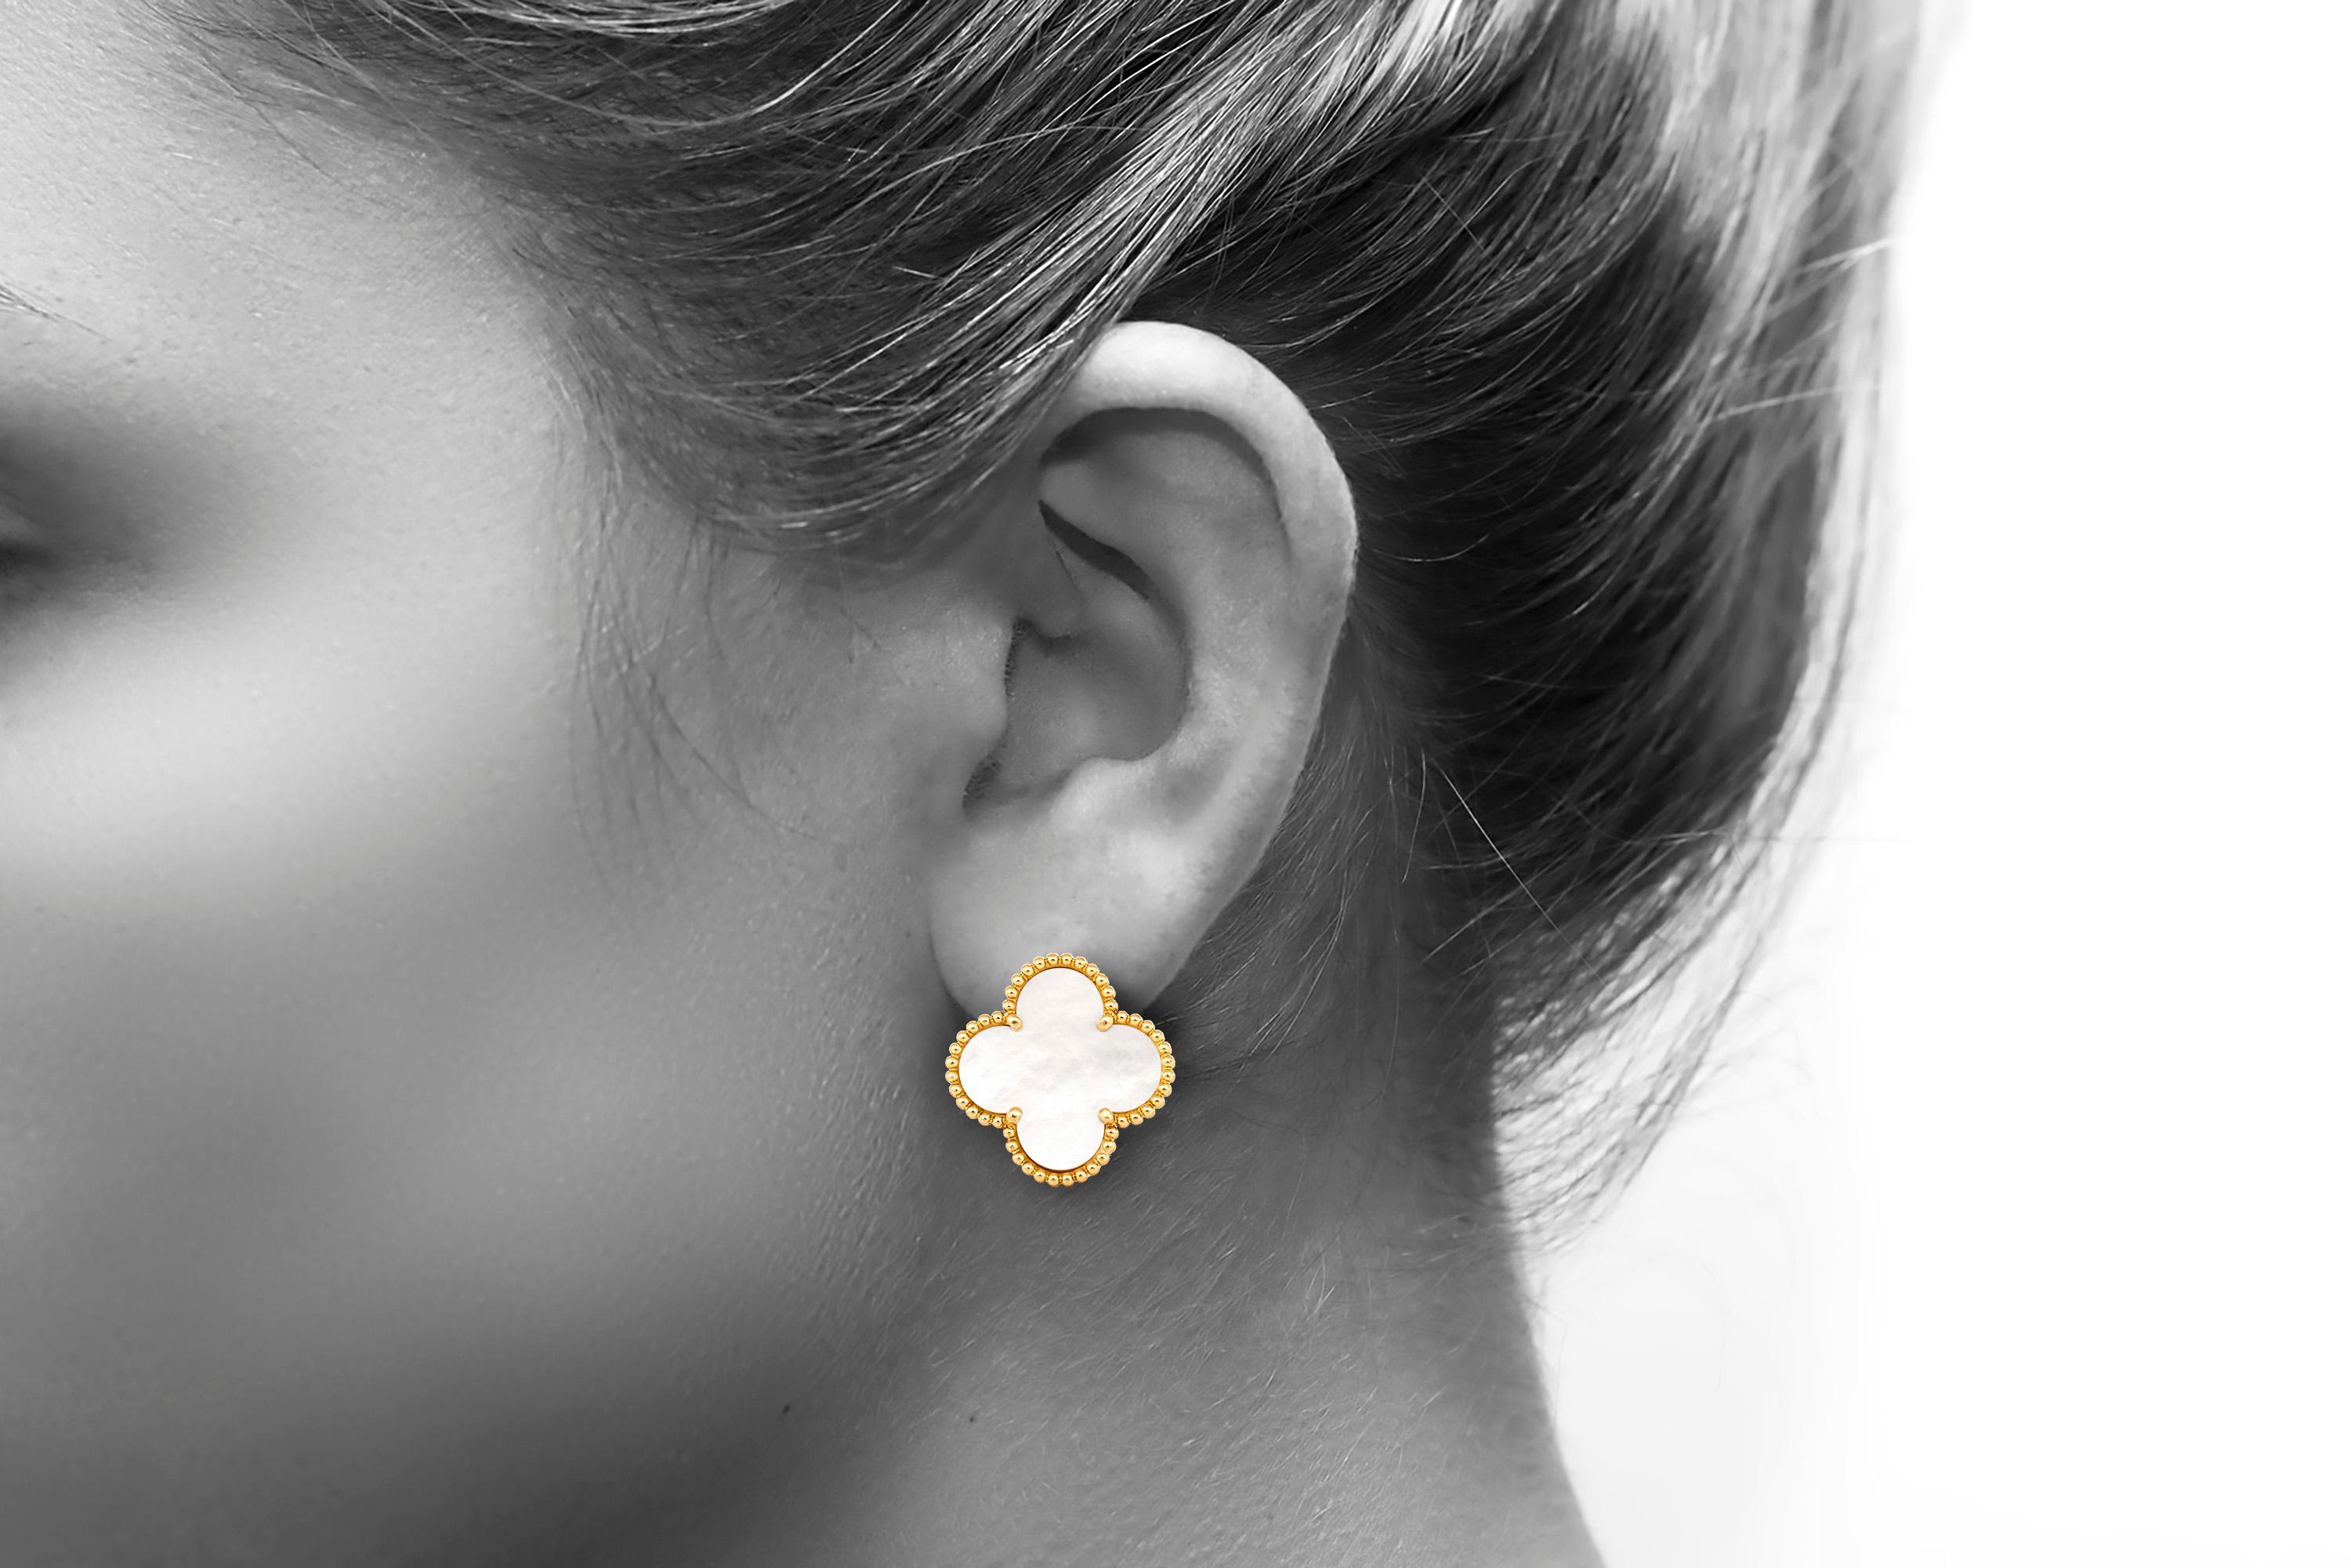 Van Cleef and Arpels Alhambra Mother of Pearl earrings finely crafted in 18k yellow gold.